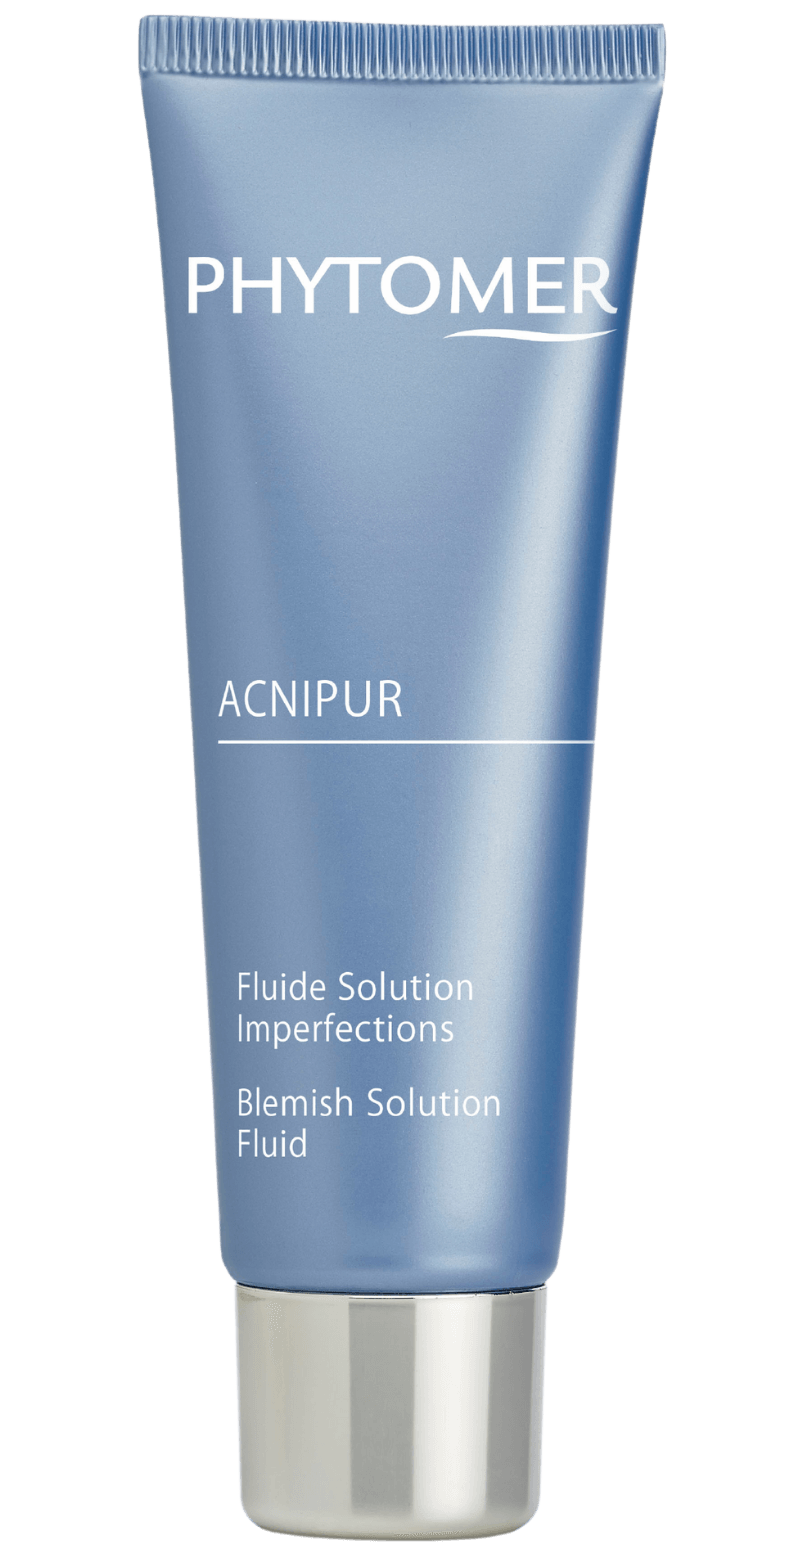 's Phytomer ACNIPUR Blemish Solution Fluid - Bellini's Skin and Parfumerie 